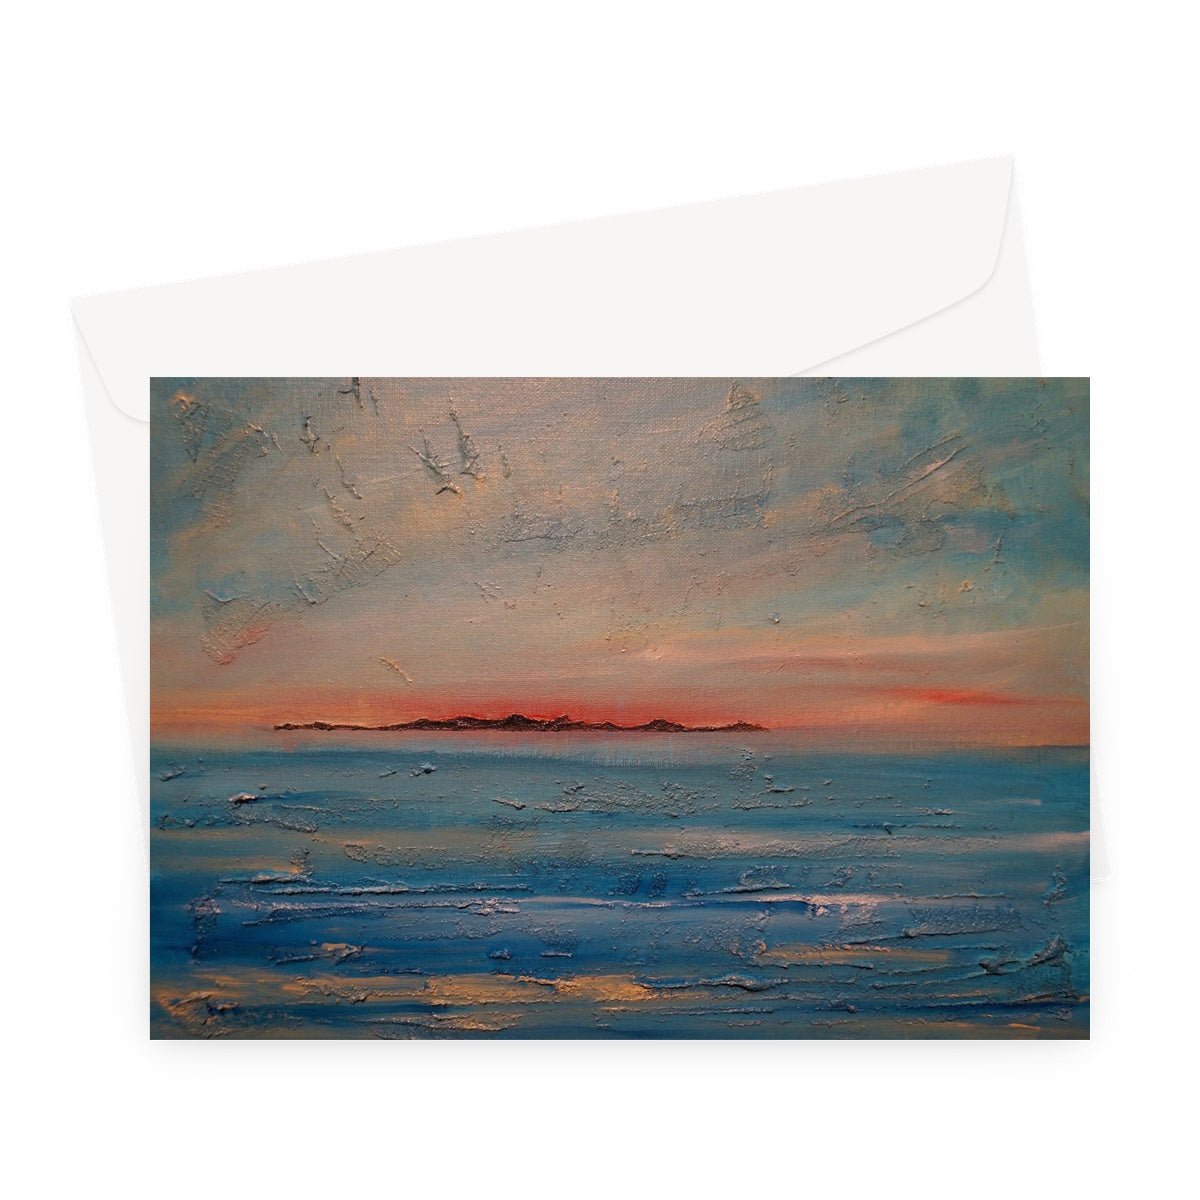 Gigha Sunset Art Gifts Greeting Card-Greetings Cards-Hebridean Islands Art Gallery-A5 Landscape-1 Card-Paintings, Prints, Homeware, Art Gifts From Scotland By Scottish Artist Kevin Hunter